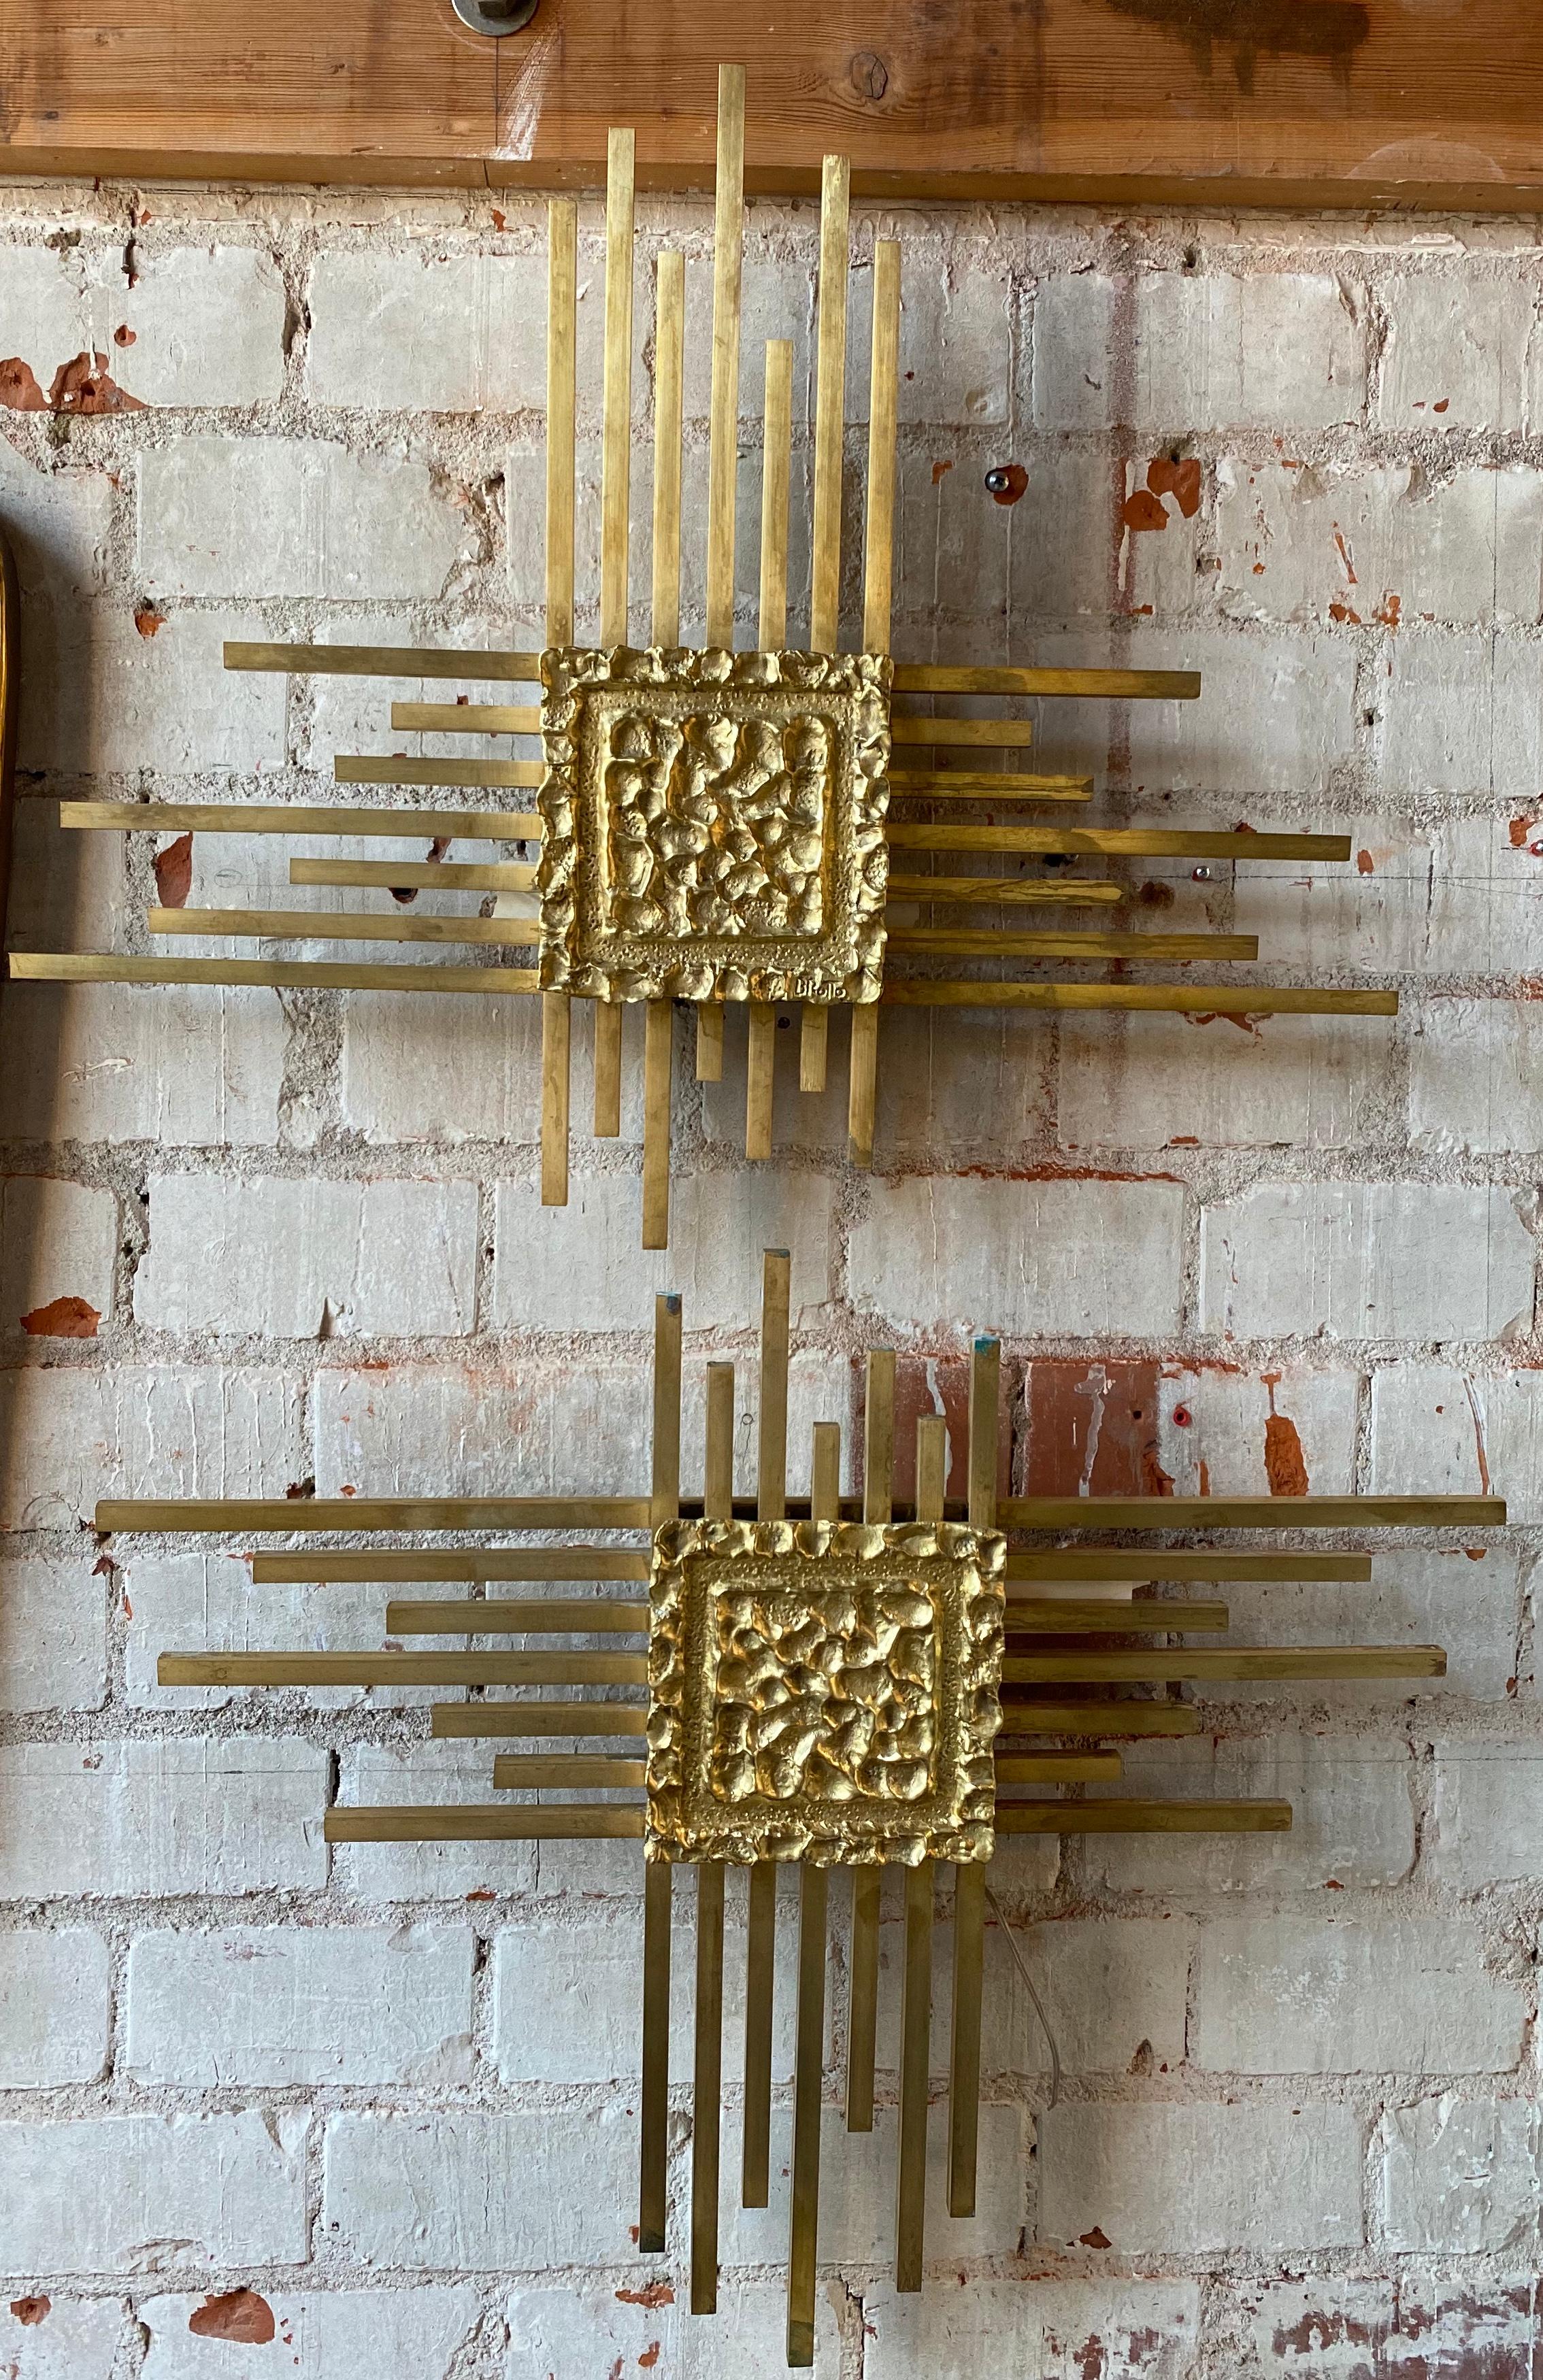 An incredible pair of 2 full brass wall sconces made in Italy by Angelo Grotto.•
Nothing touches, nothing clashes, which gives this piece of furniture a completely peaceful yet strong expression. A piece like this will stand the test of time.